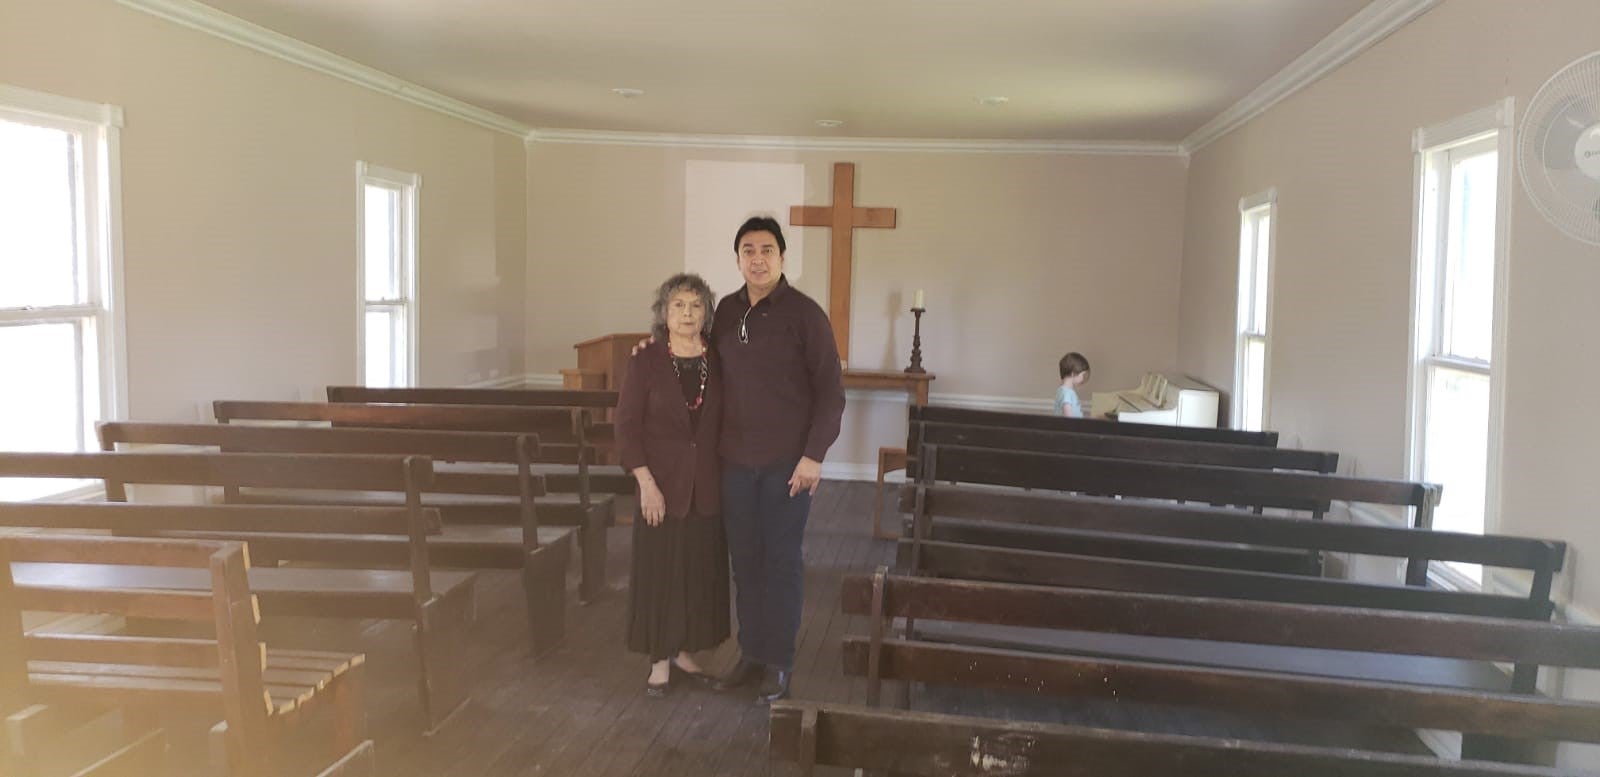 Descendants of Eli Jackson stand in the 154-year-old Texan church that bears his name. Construction on Trump's border wall may desecrate a cemetery next to the church.